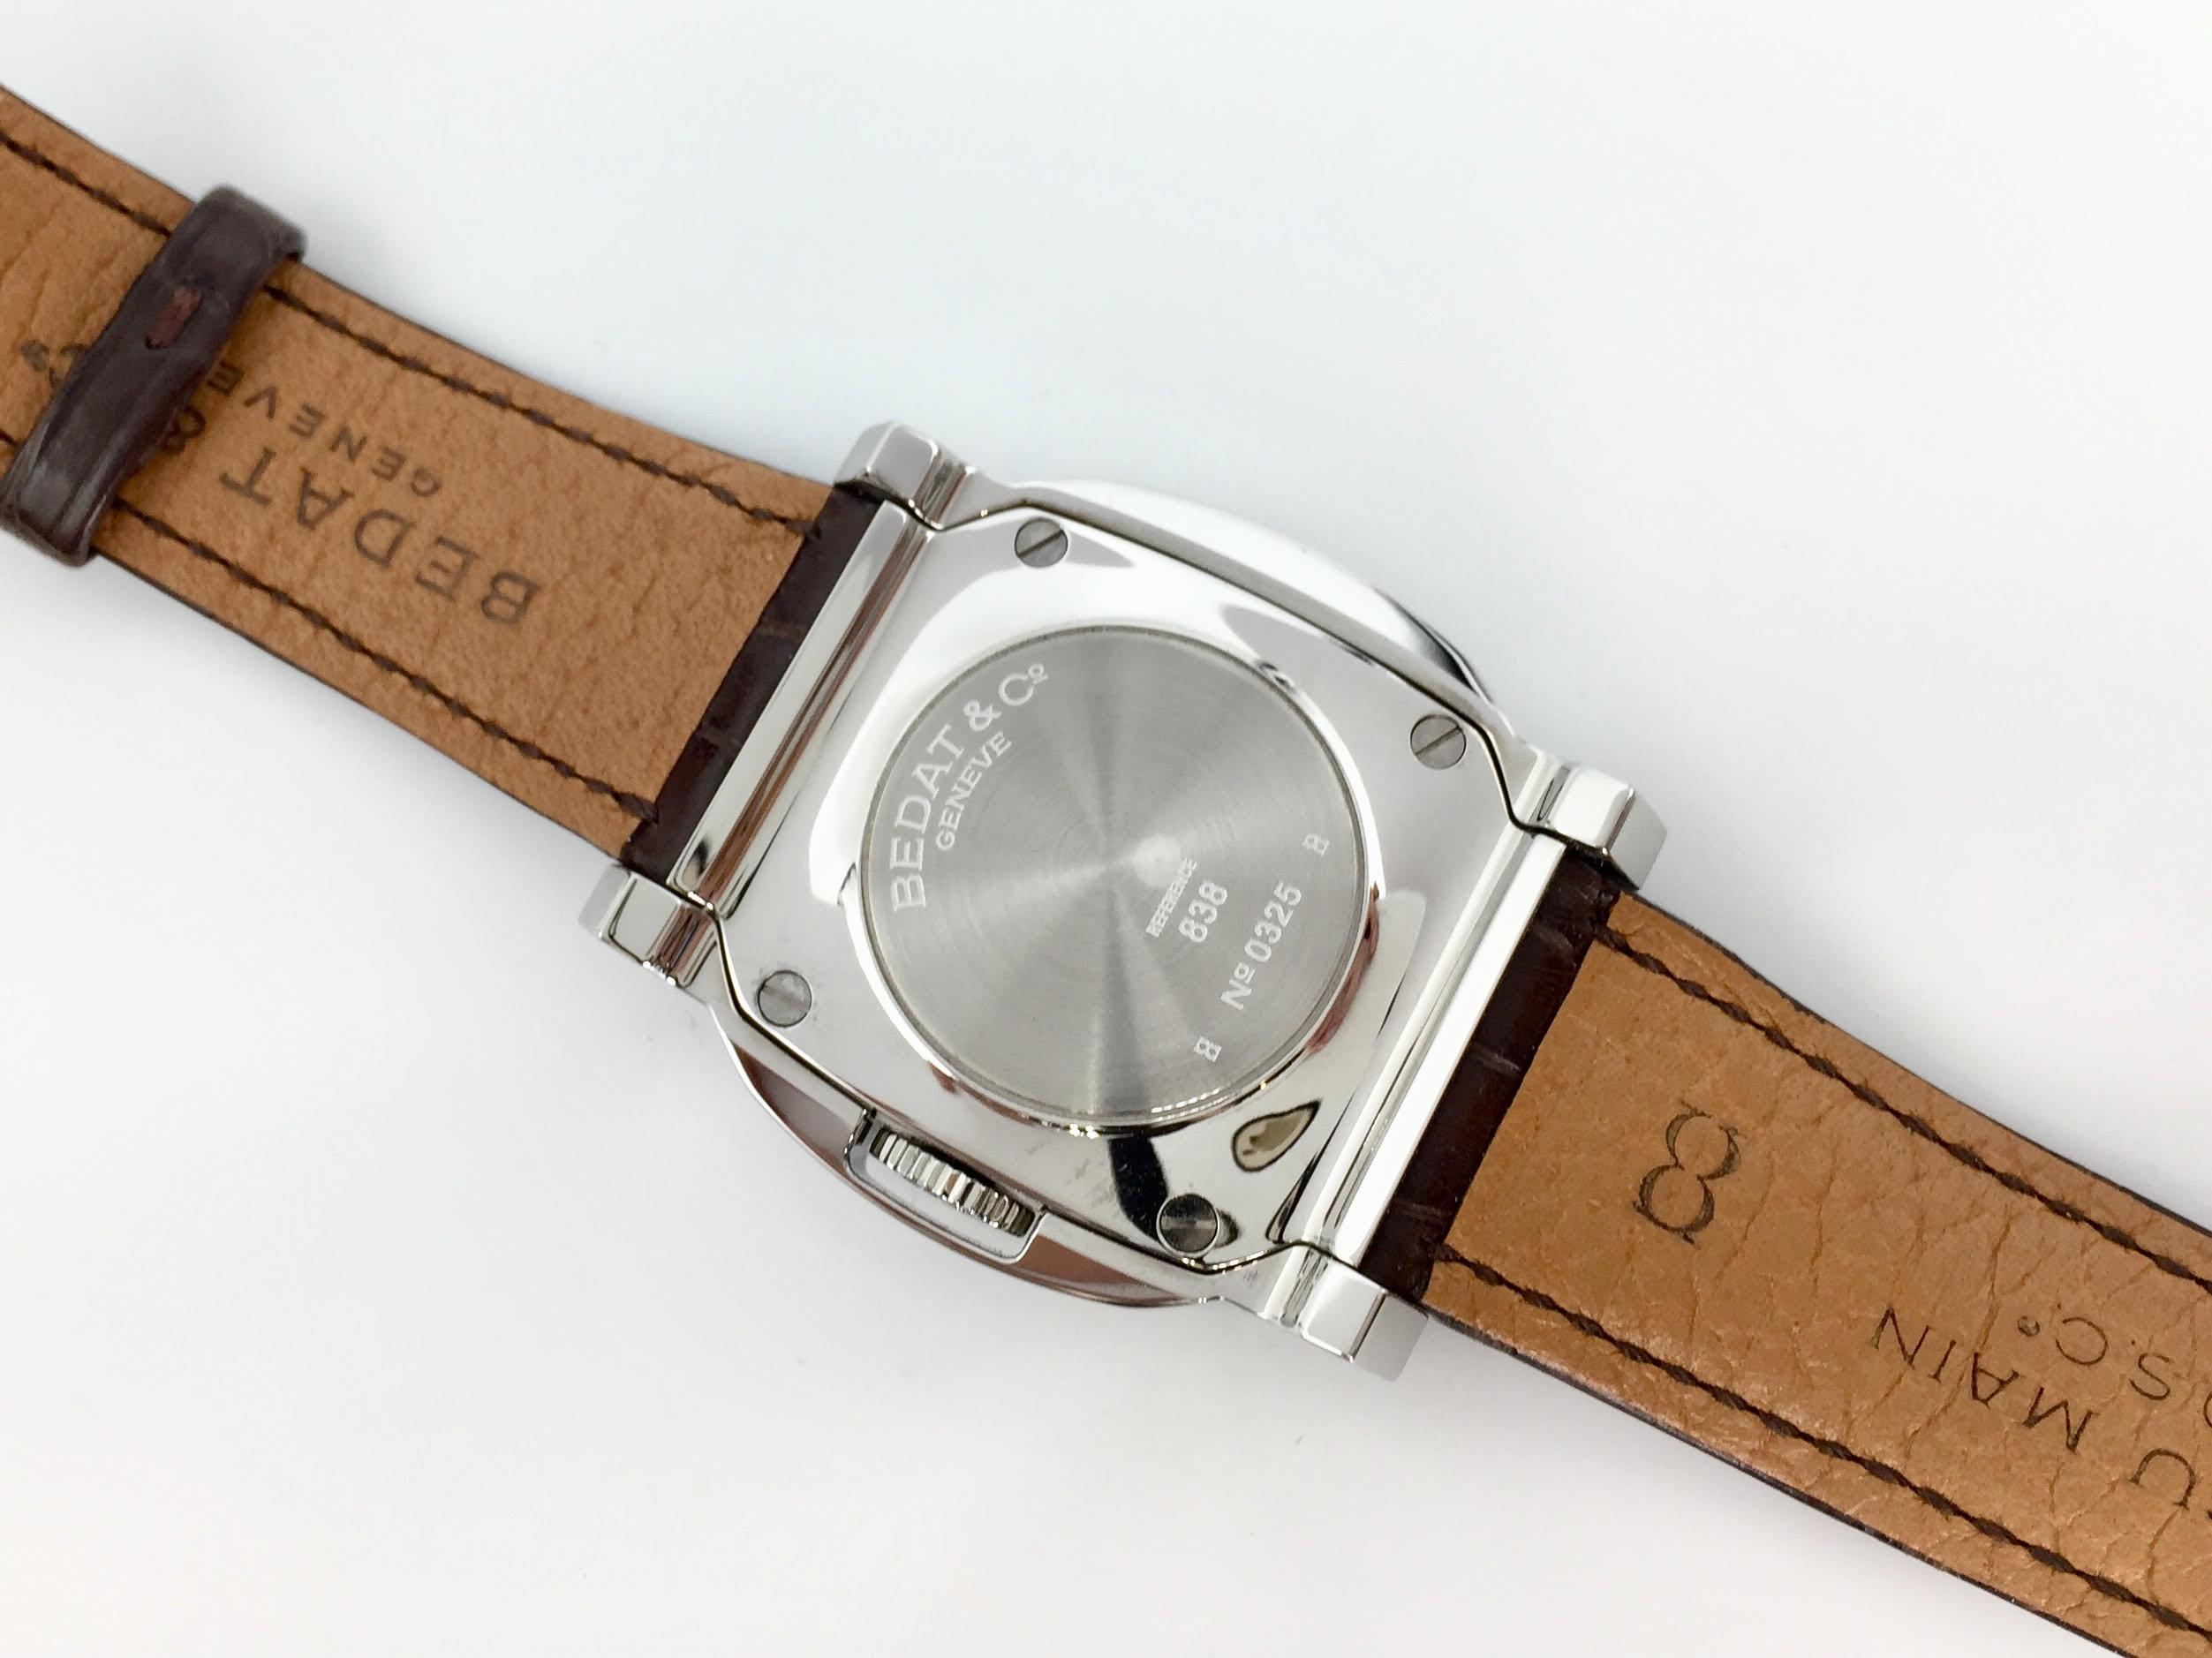 Bedat & Co. No. 8 Stainless Steel Automatic Watch 838.010.100 In New Condition For Sale In Pikesville, MD